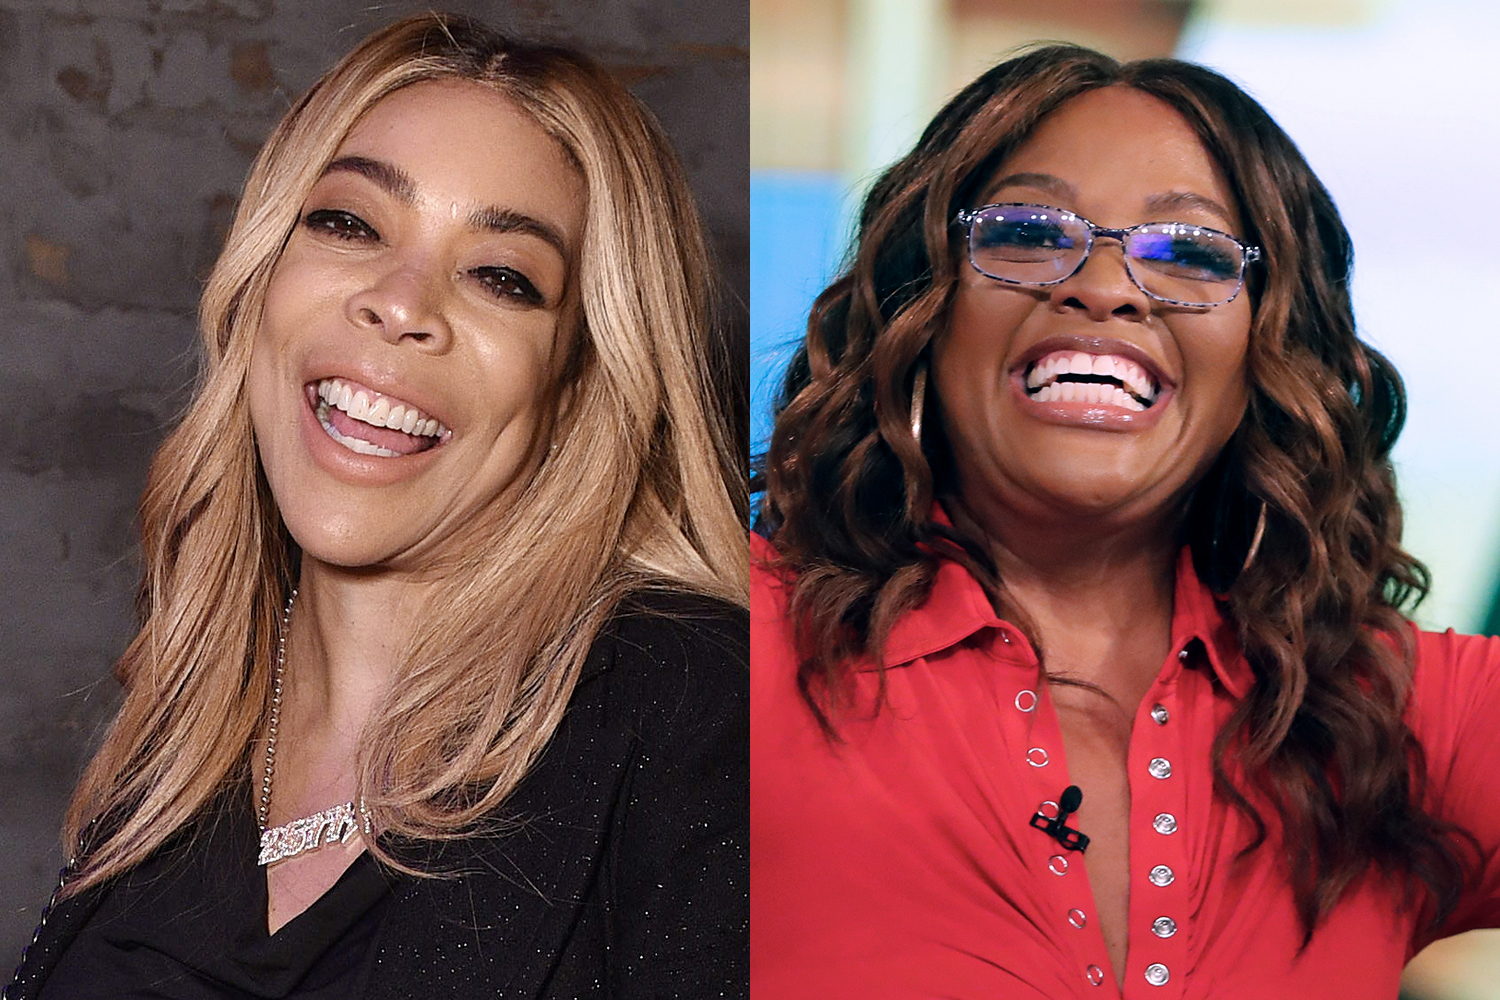 Wendy Williams and Sherri Shepherd smiling in two separate photos